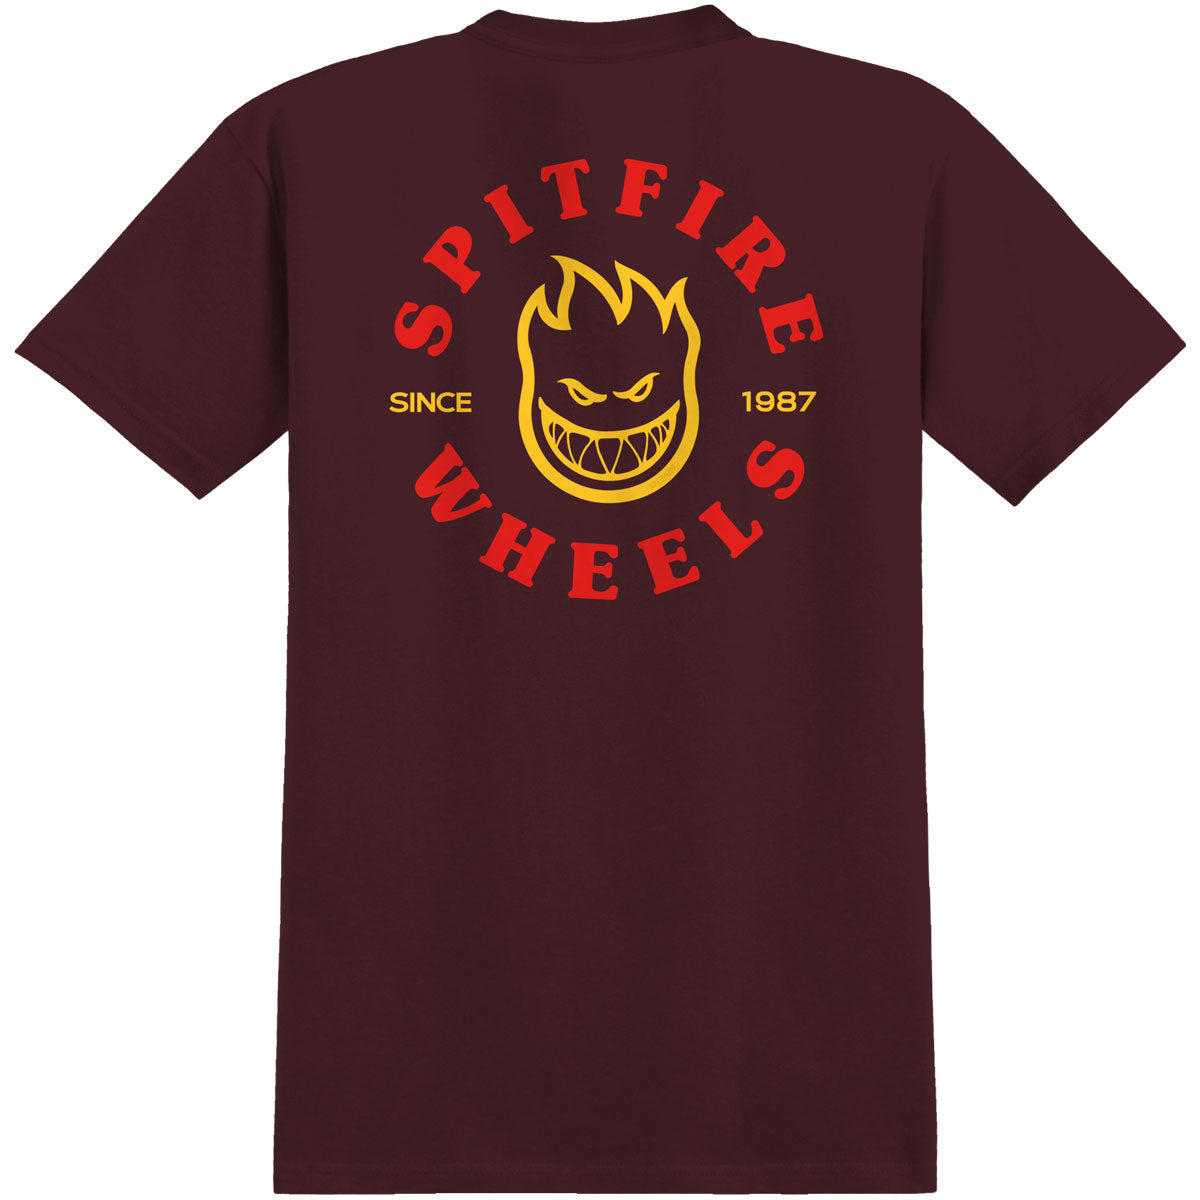 Spitfire Youth Bighead Classic T-Shirt - Maroon/Red/Yellow image 1